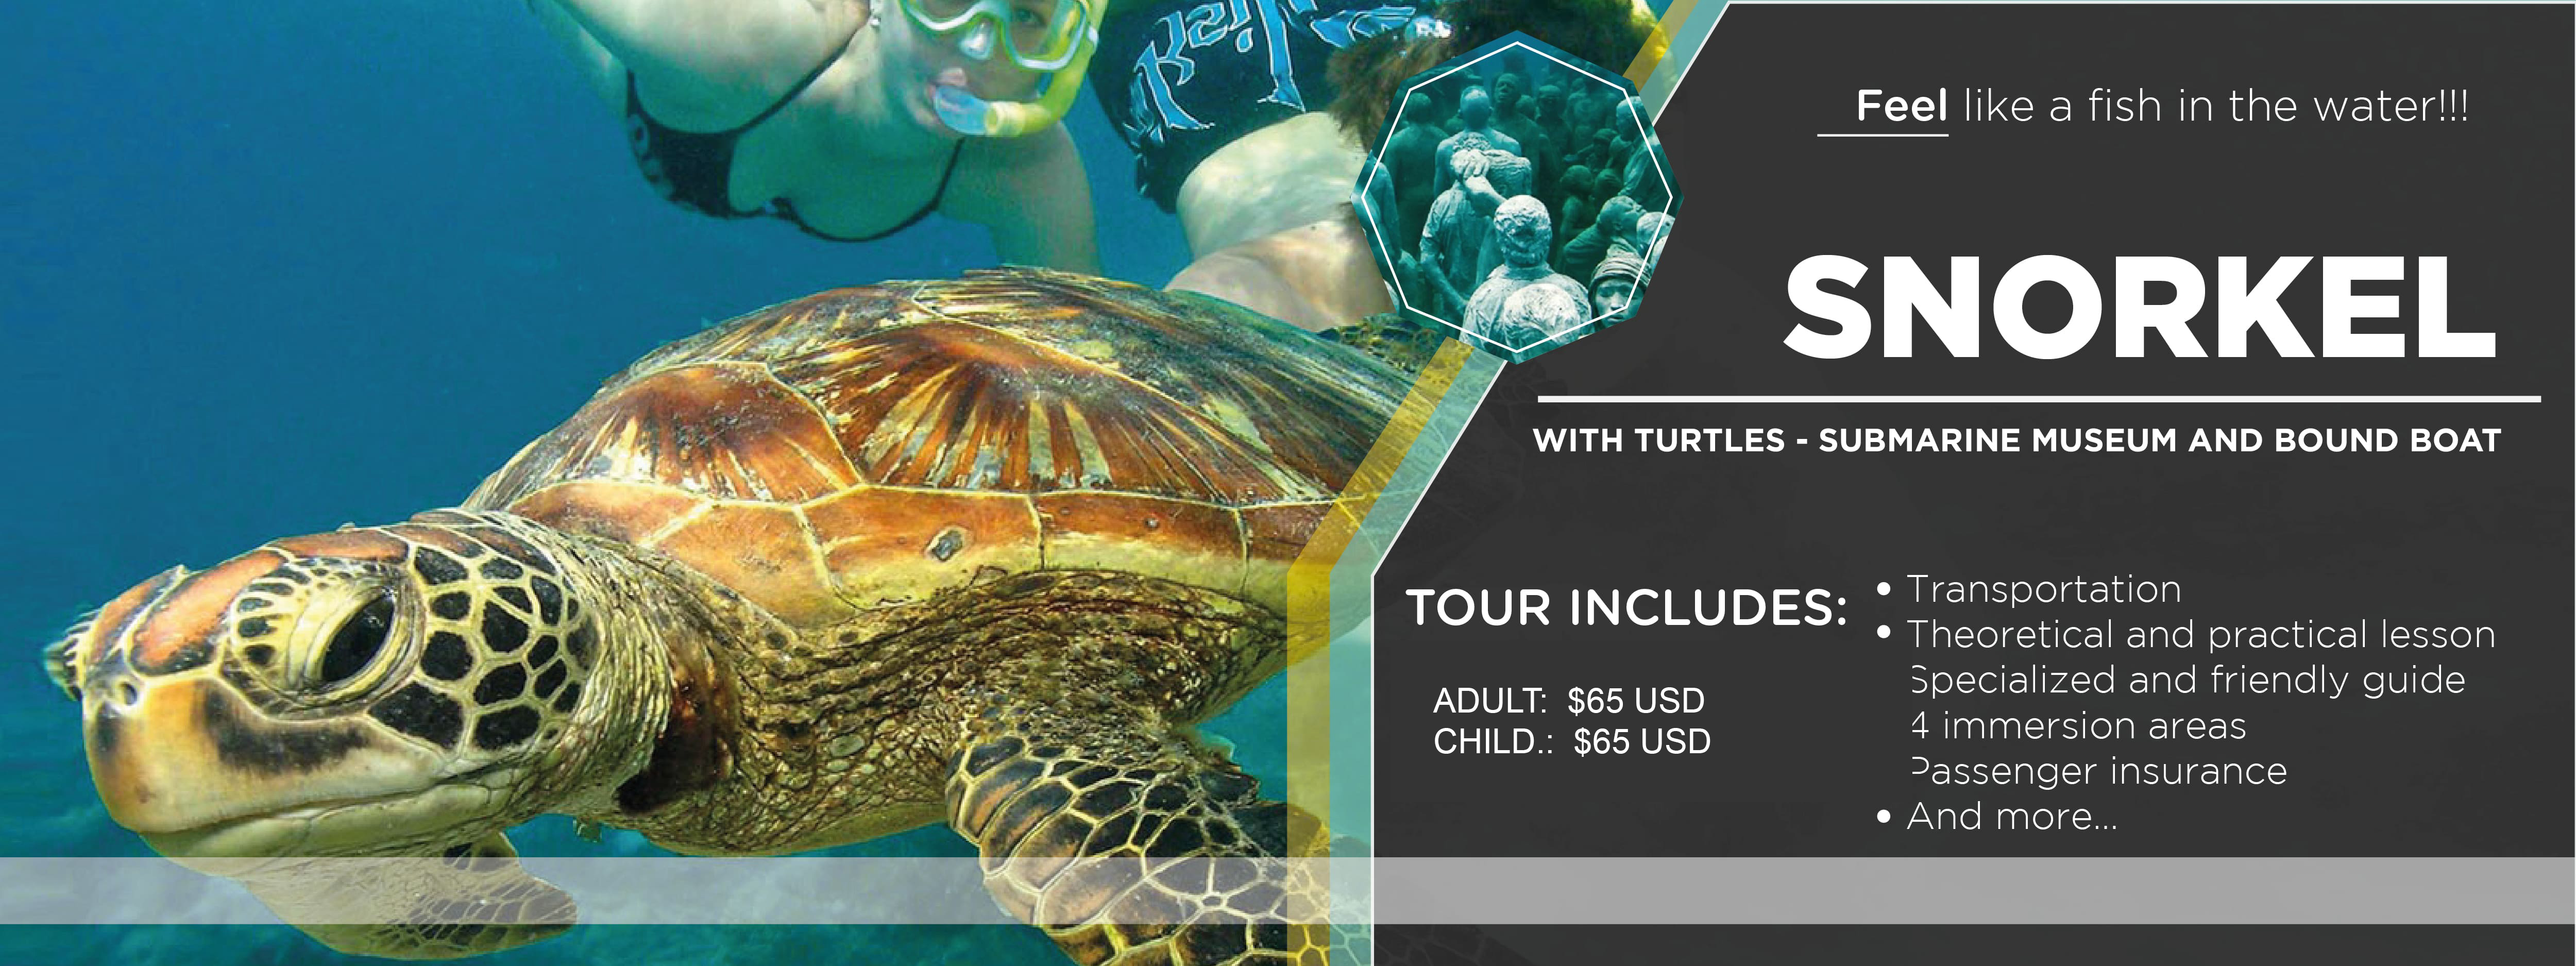 TOUR SNORKEL WITH TURTLES - SUBMARINE MUSEUM AND BOUND BOAT